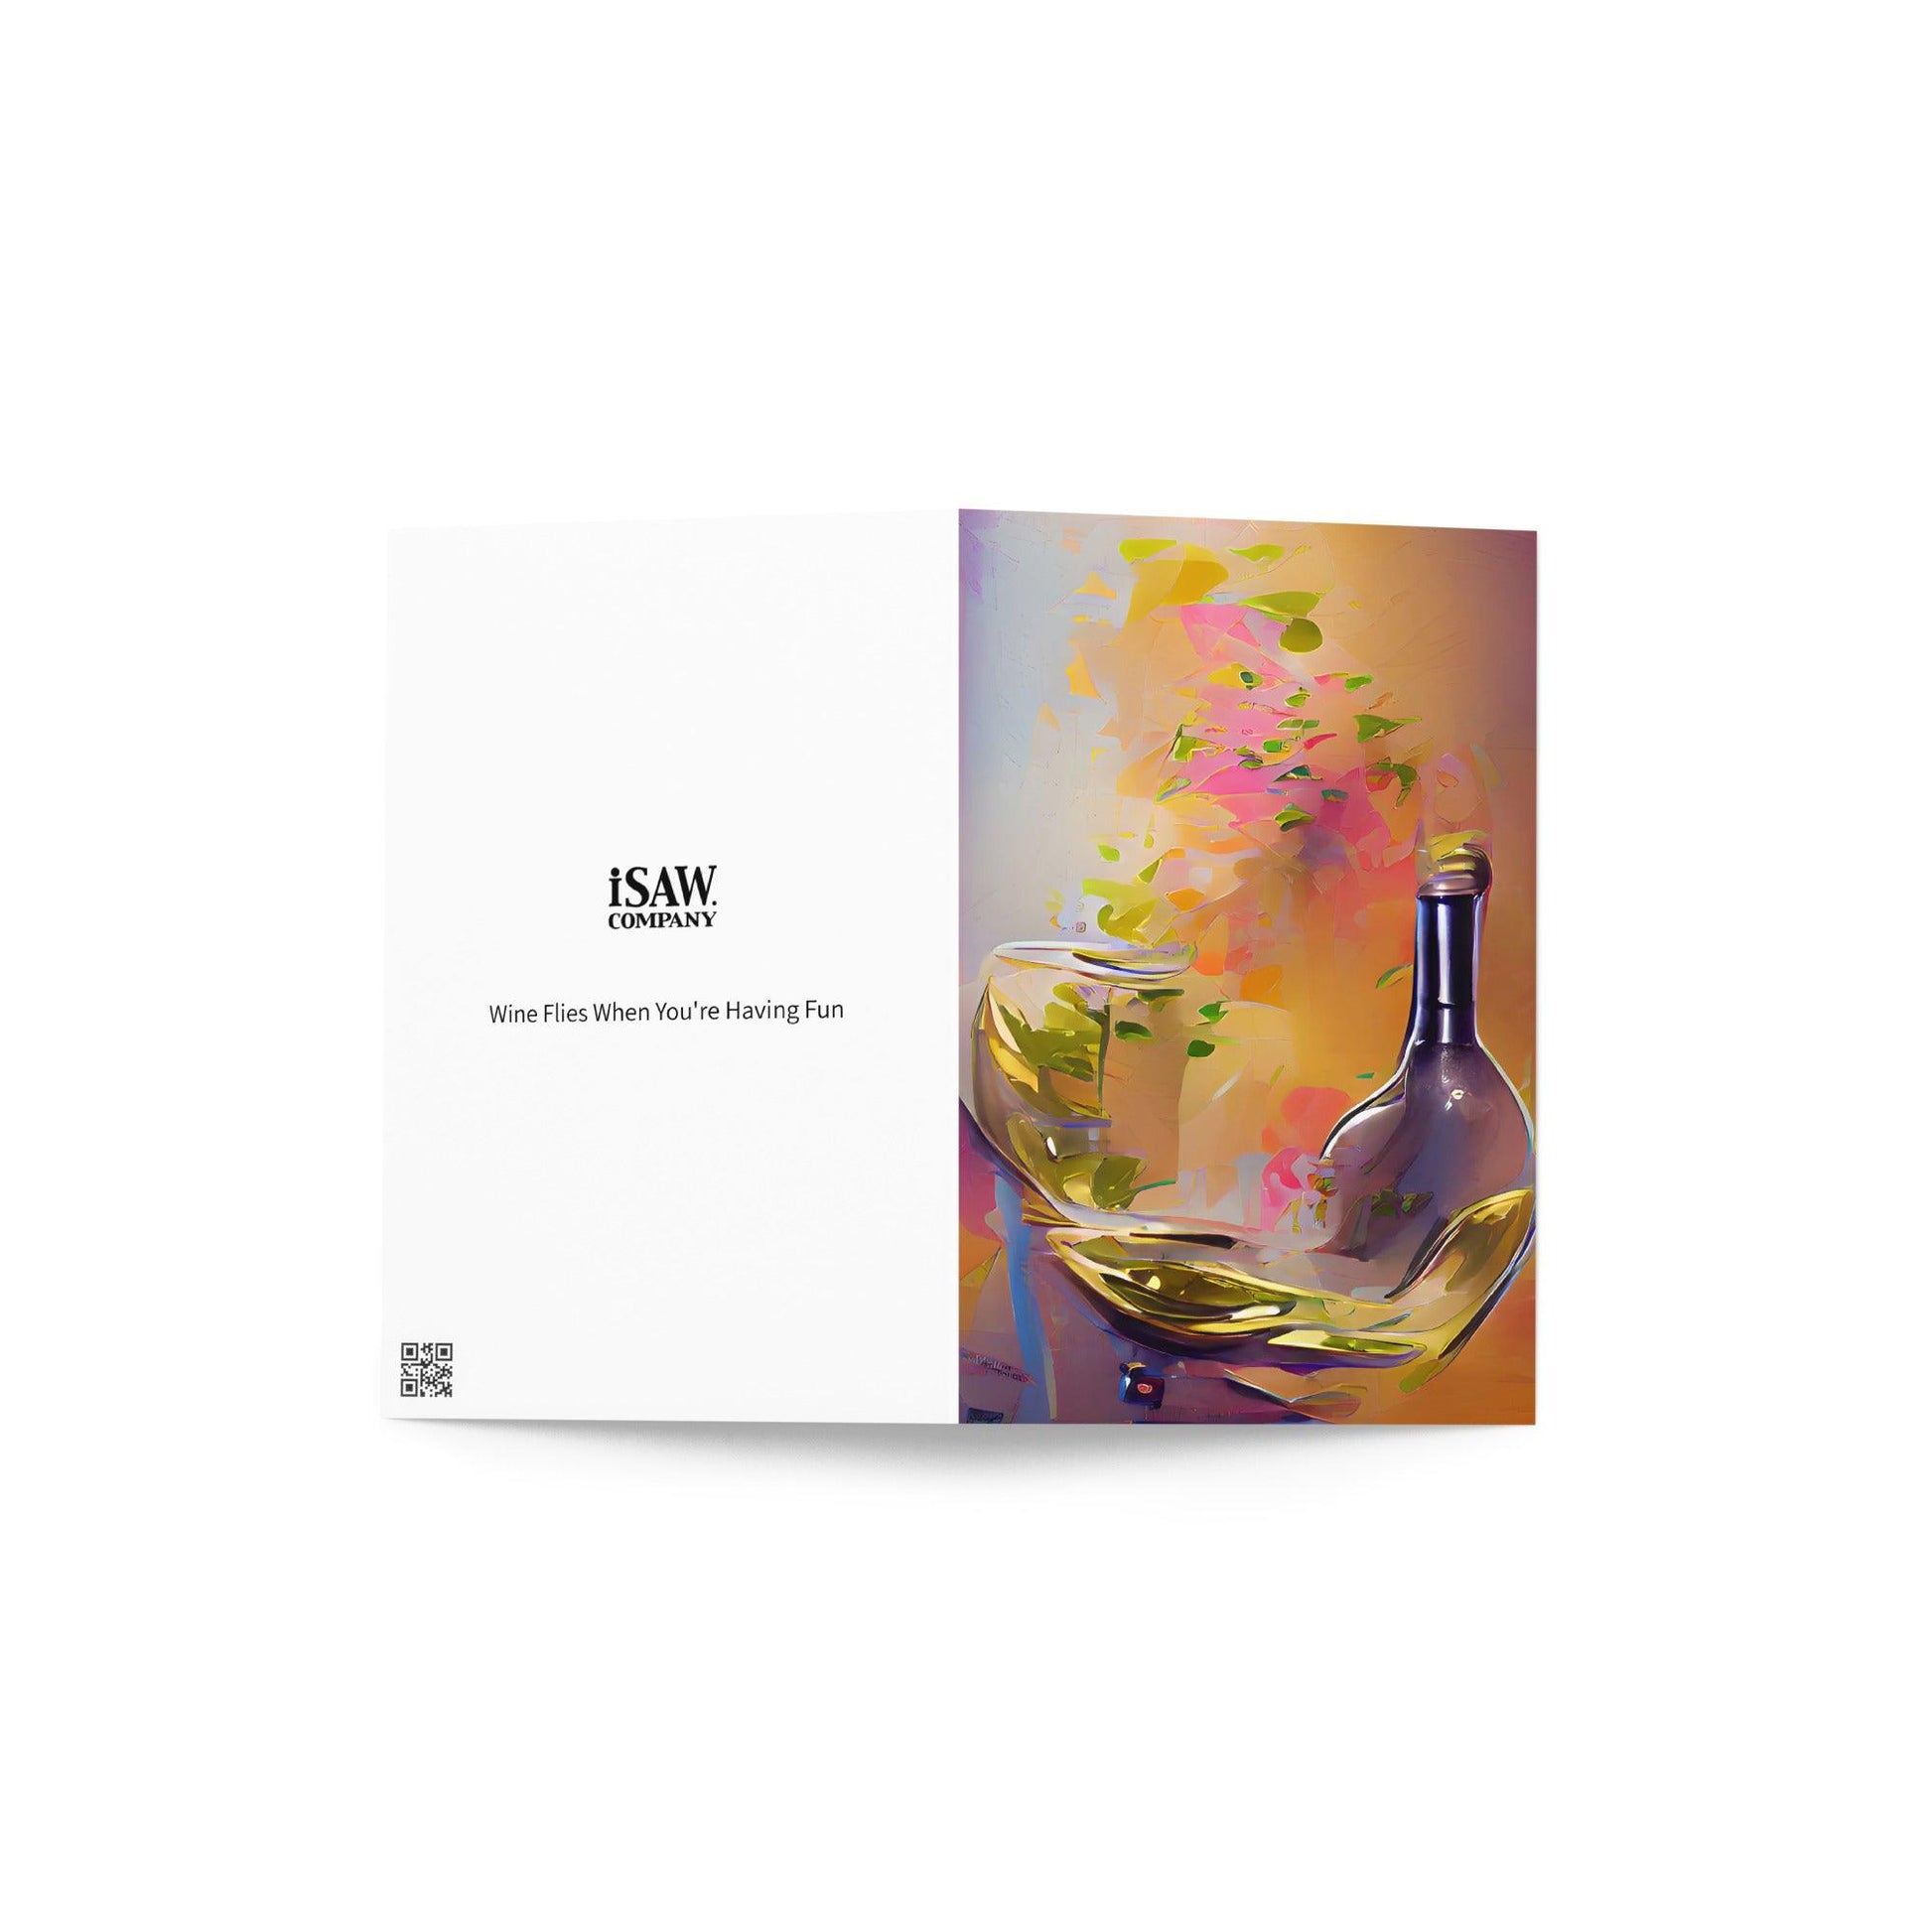 Wine Flies When You’re Having Fun - Note Card - iSAW Company